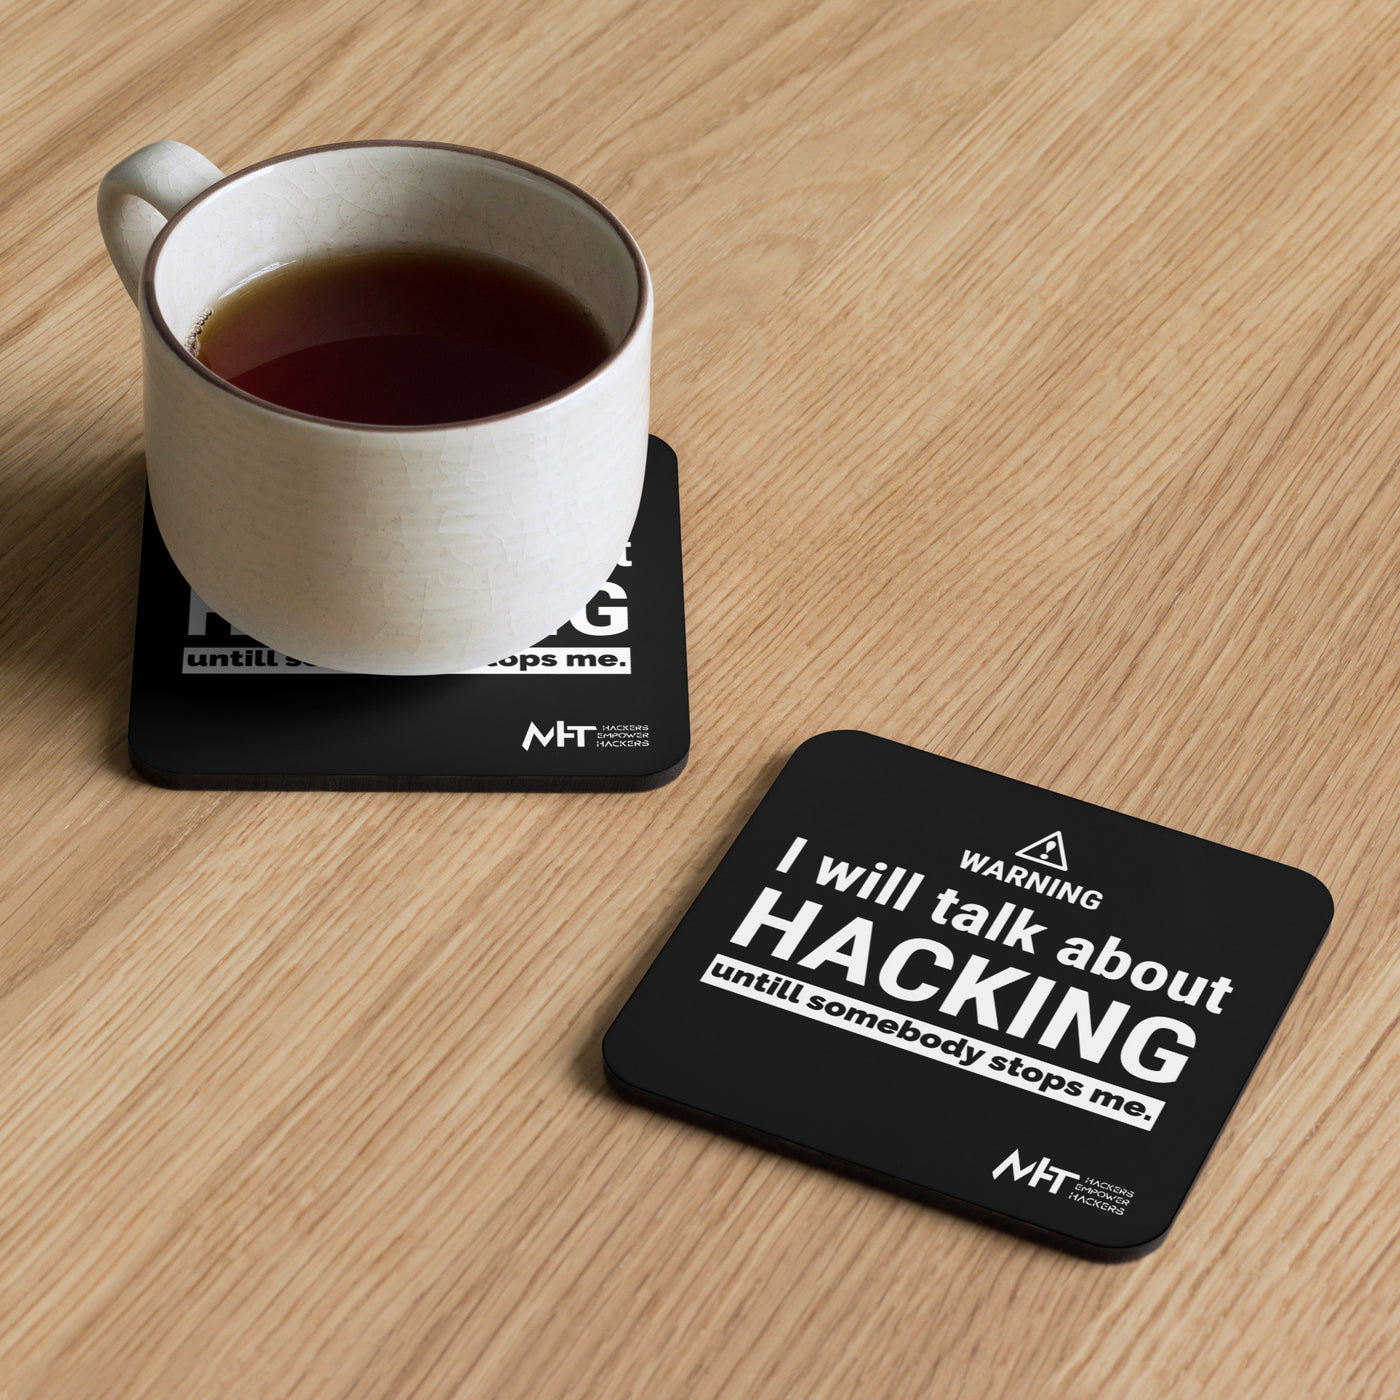 I will talk about hacking - Cork-back coaster